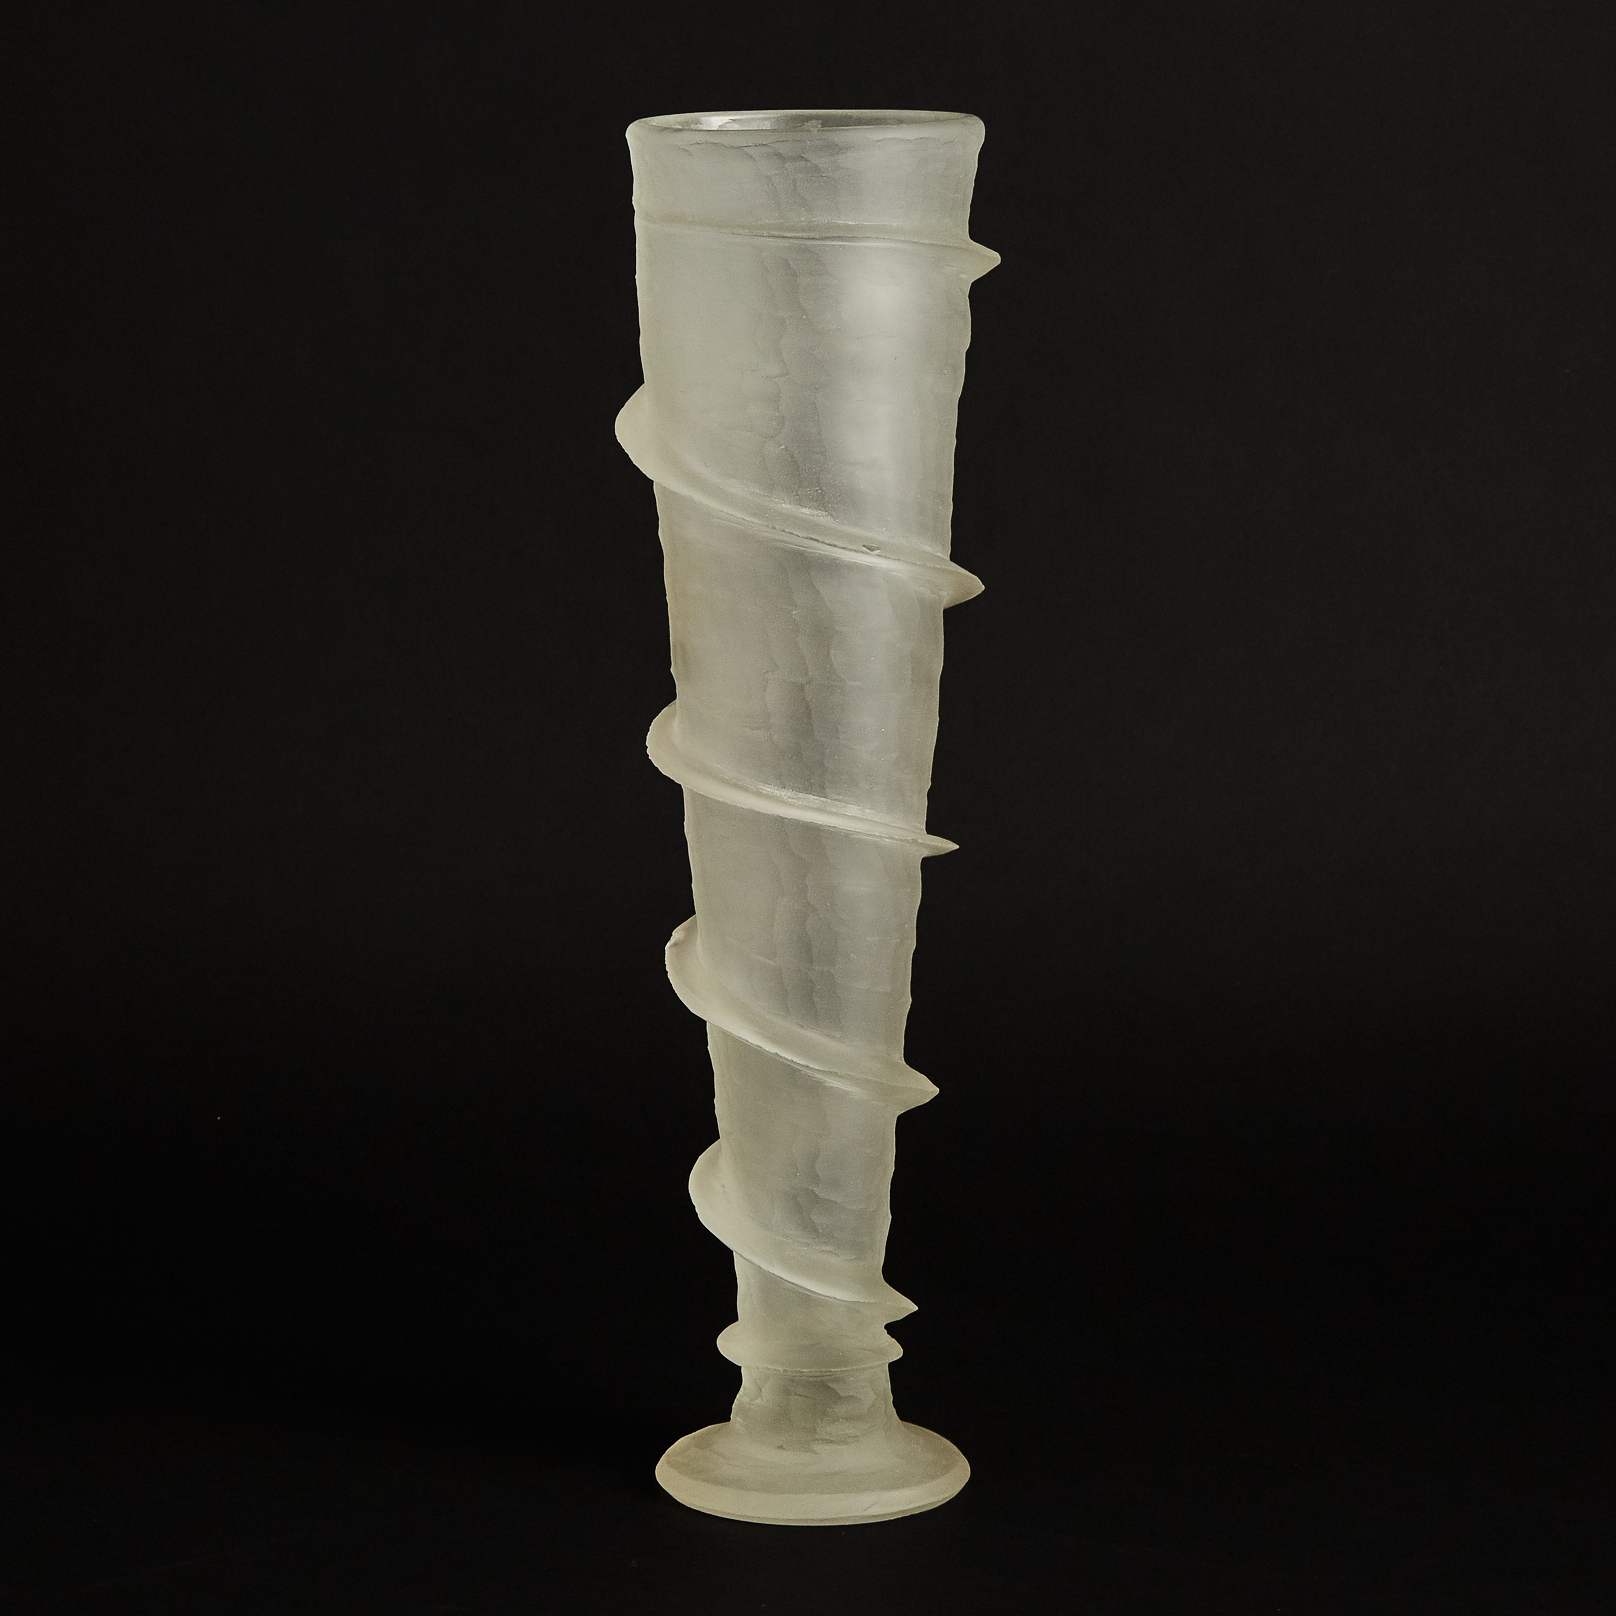 Brad Copping (Canadian, b.1961), Carved Spiral Glass Vase, 1999